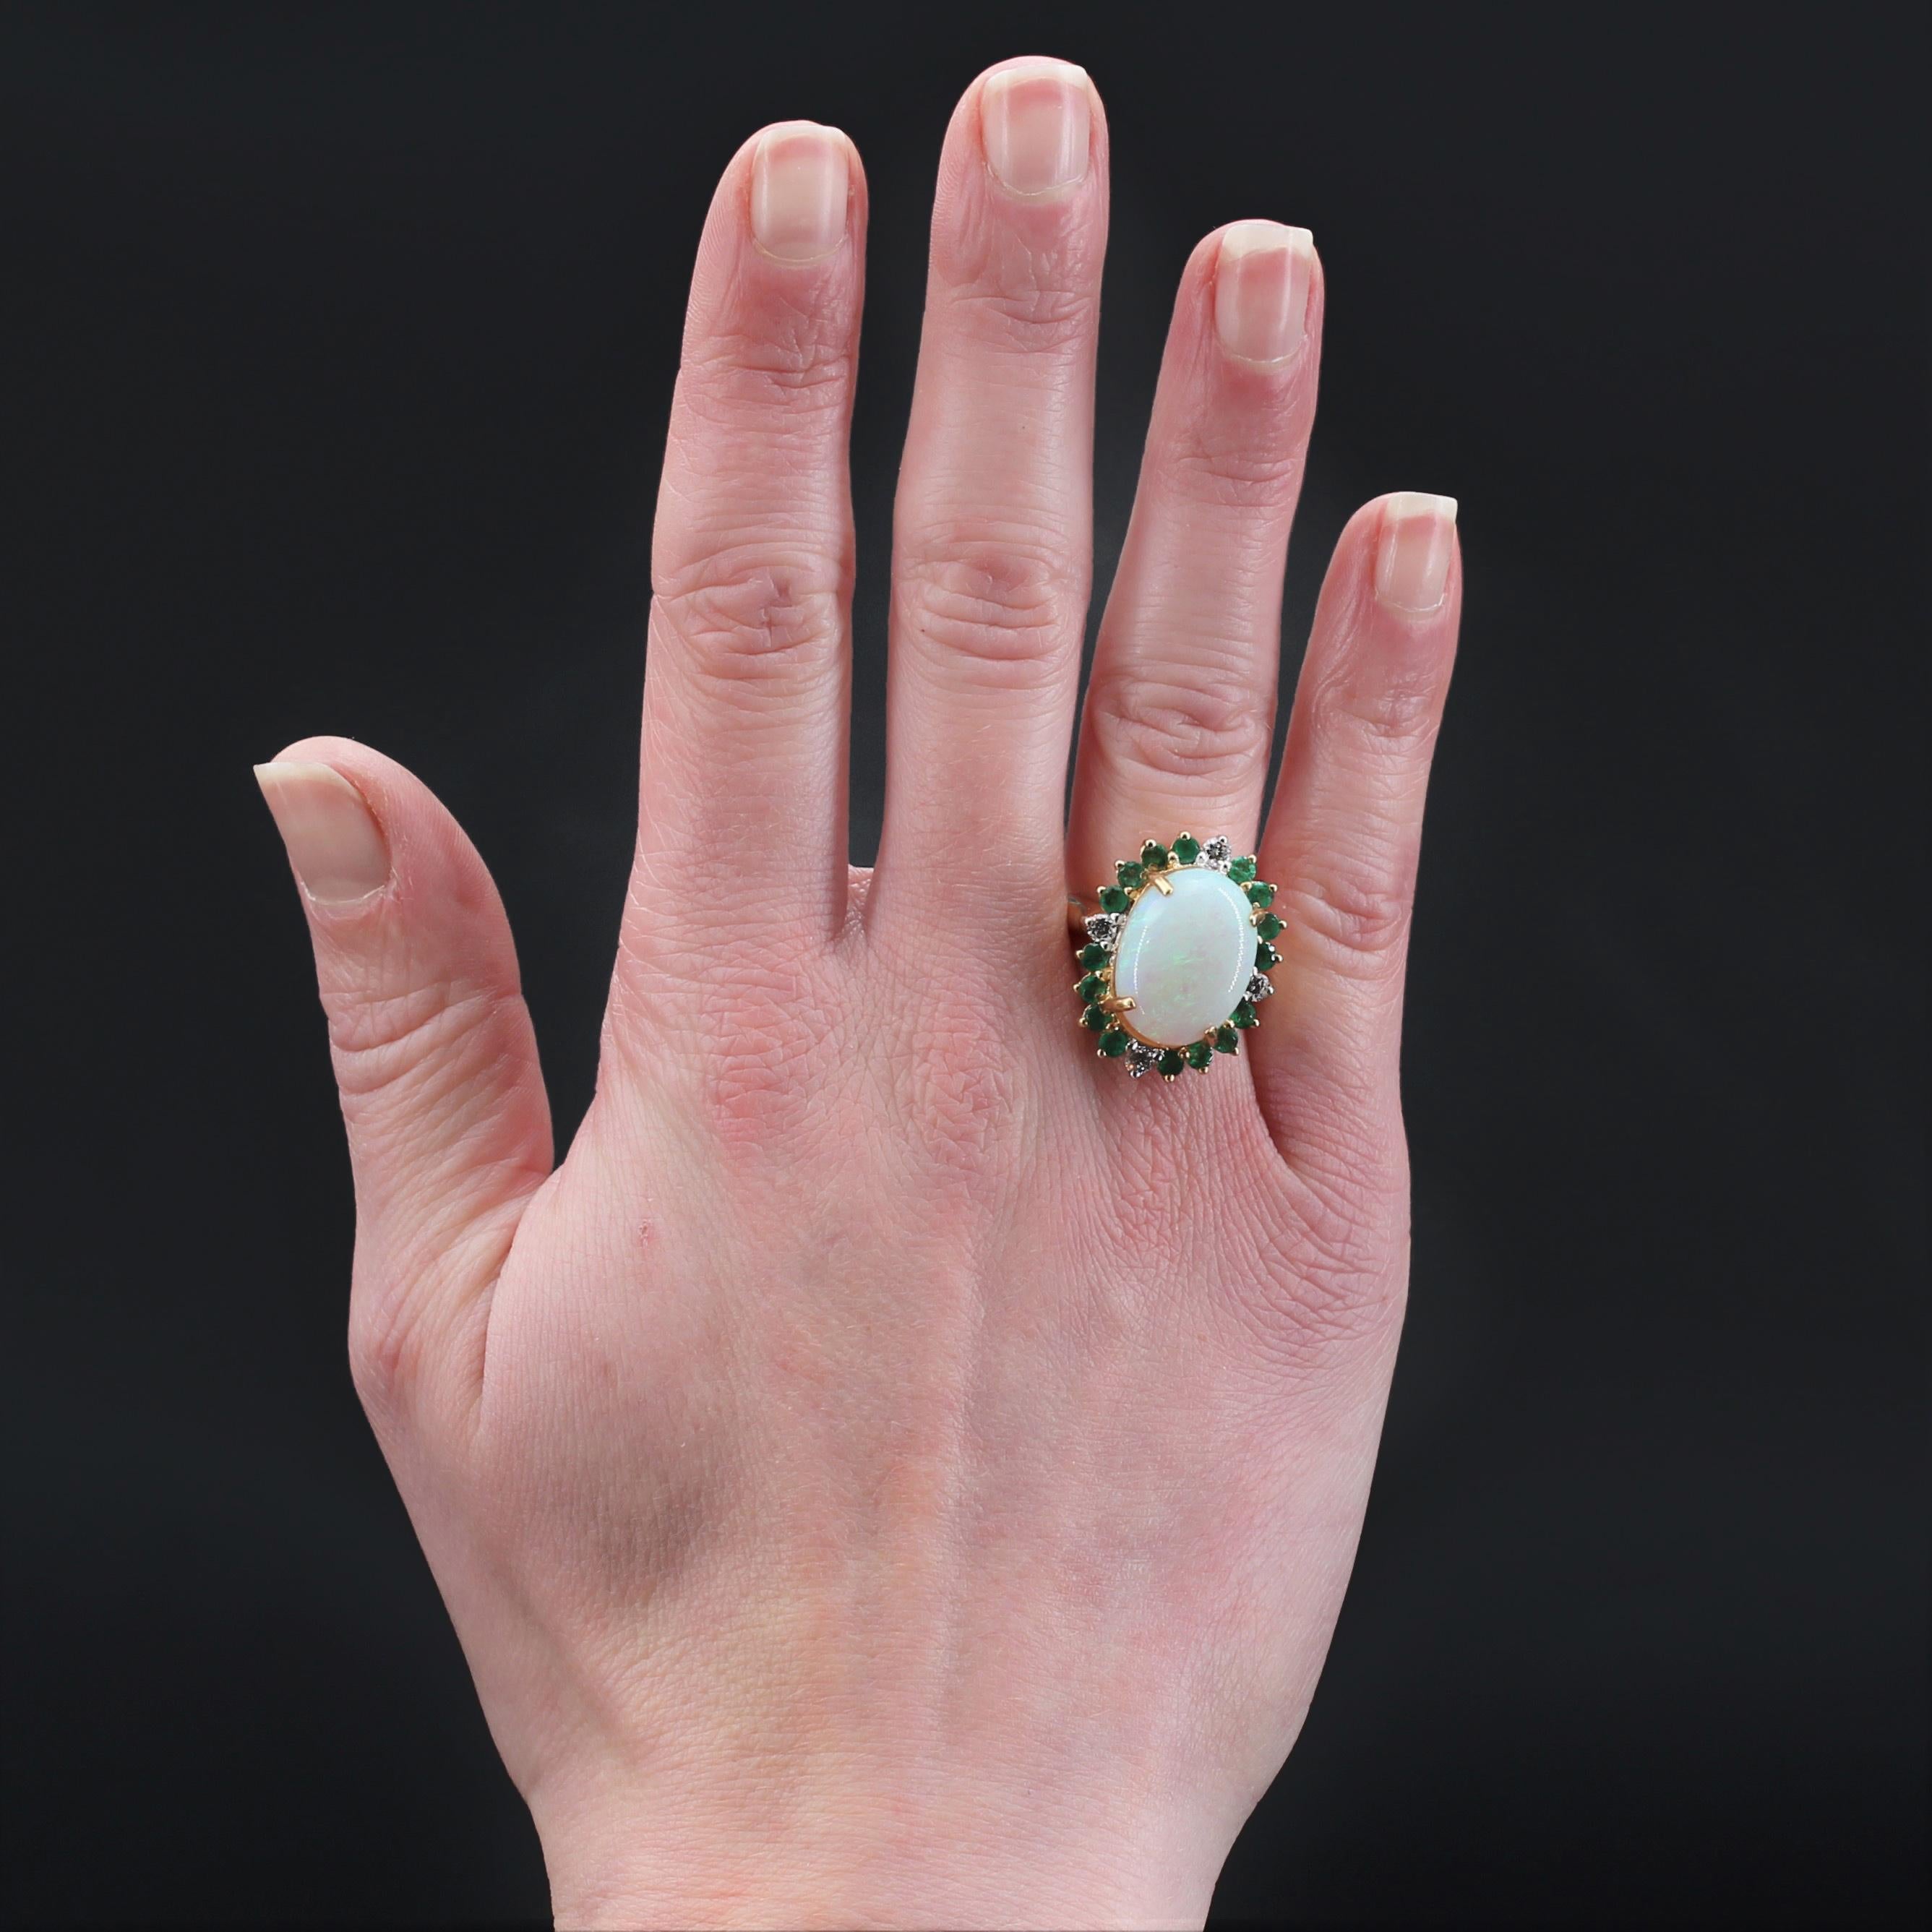 Ring in 18 karat yellow gold, eagle head hallmark.
Important retro ring, it is set with 4 claws on its top of a cabochon opal with green-blue color games, surrounded by round emeralds and at the 4 cardinal points of a modern brilliant- cut